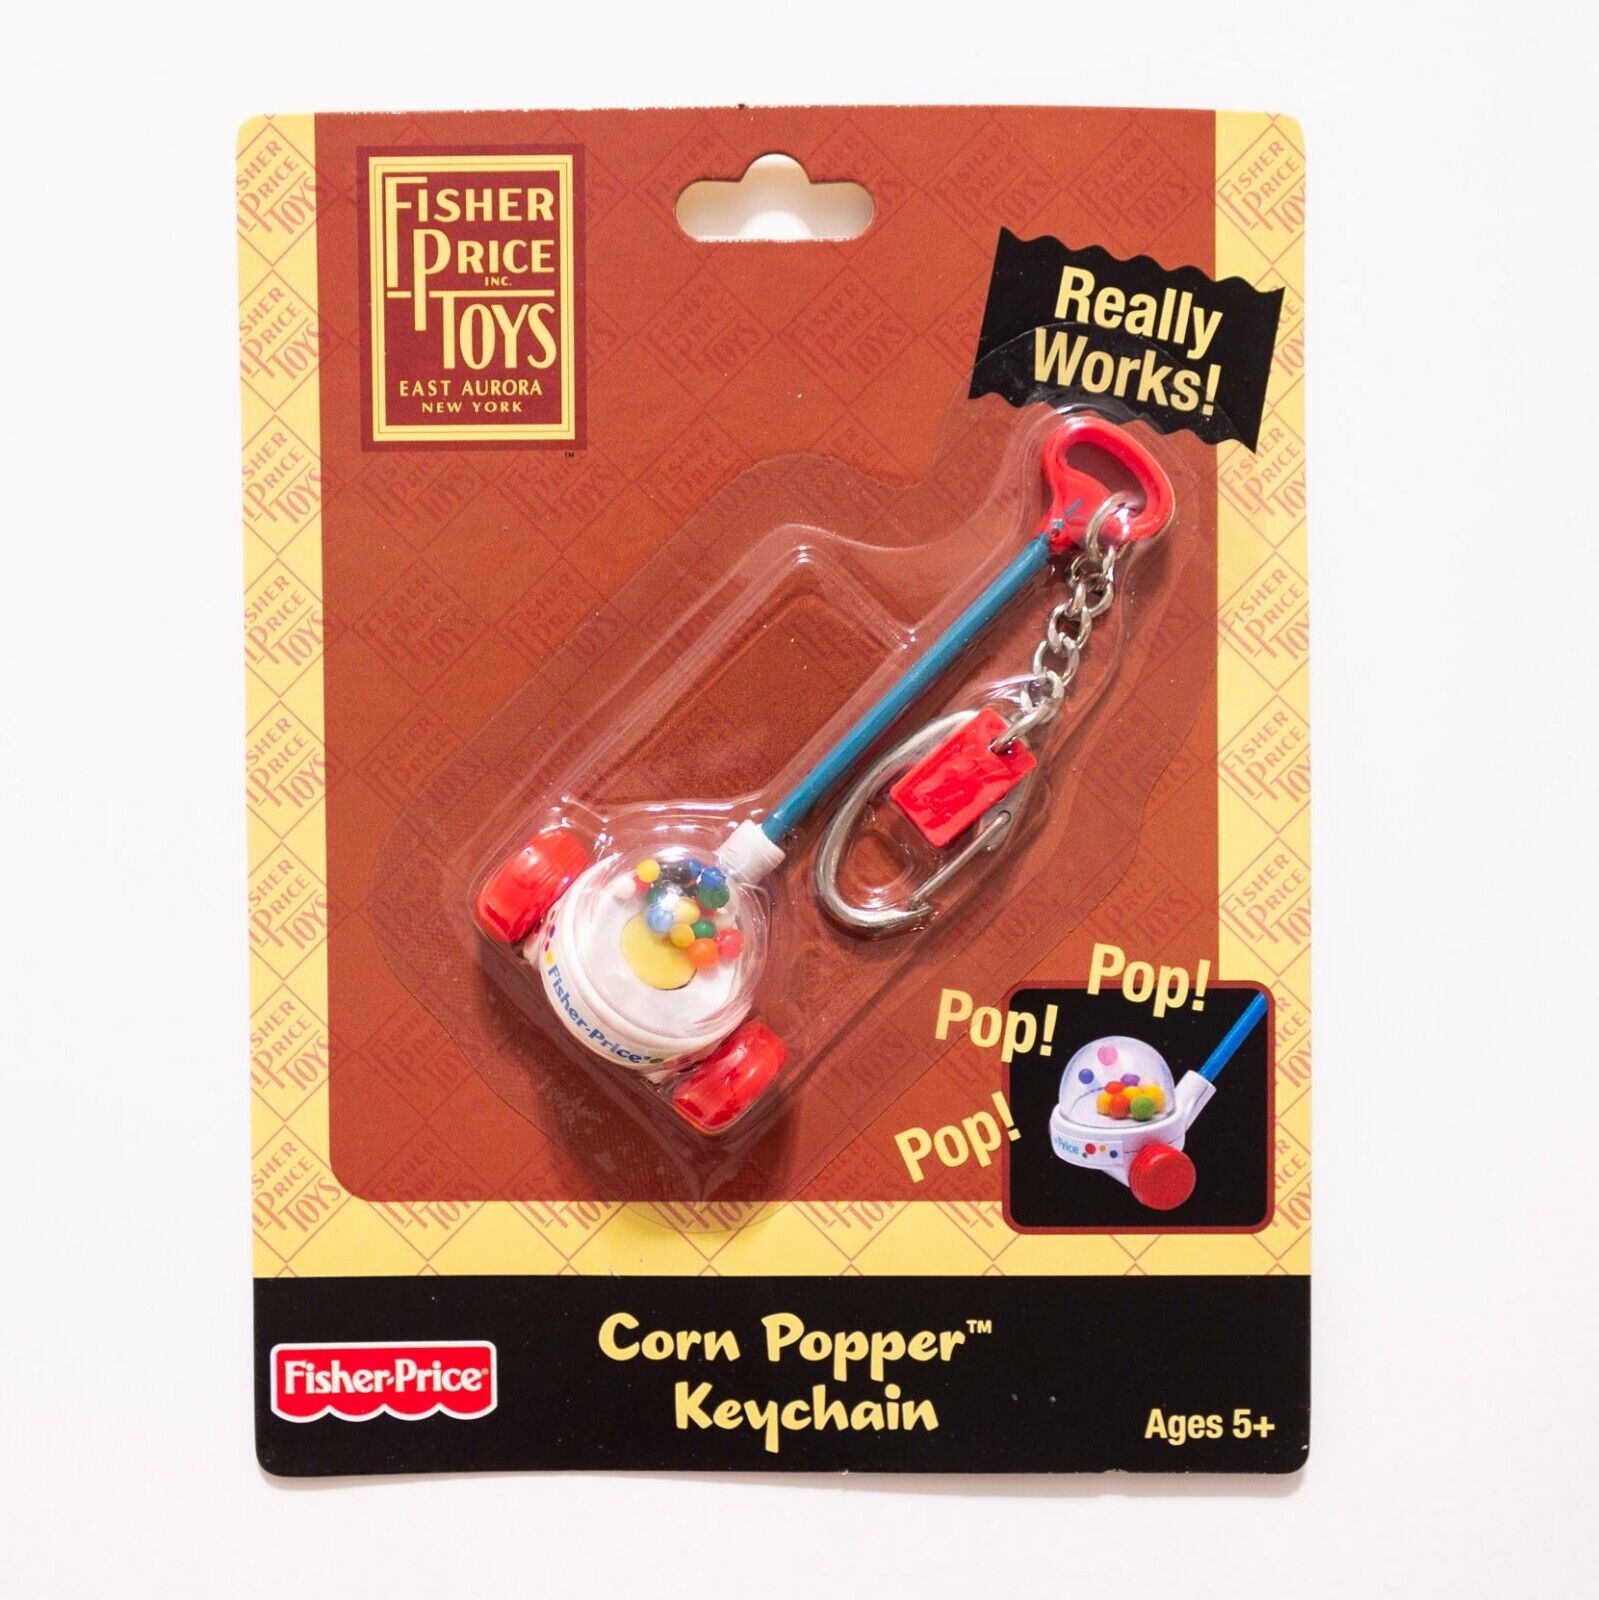 Fisher Price Corn Popper Keychain Keyring, New in Package, 2009